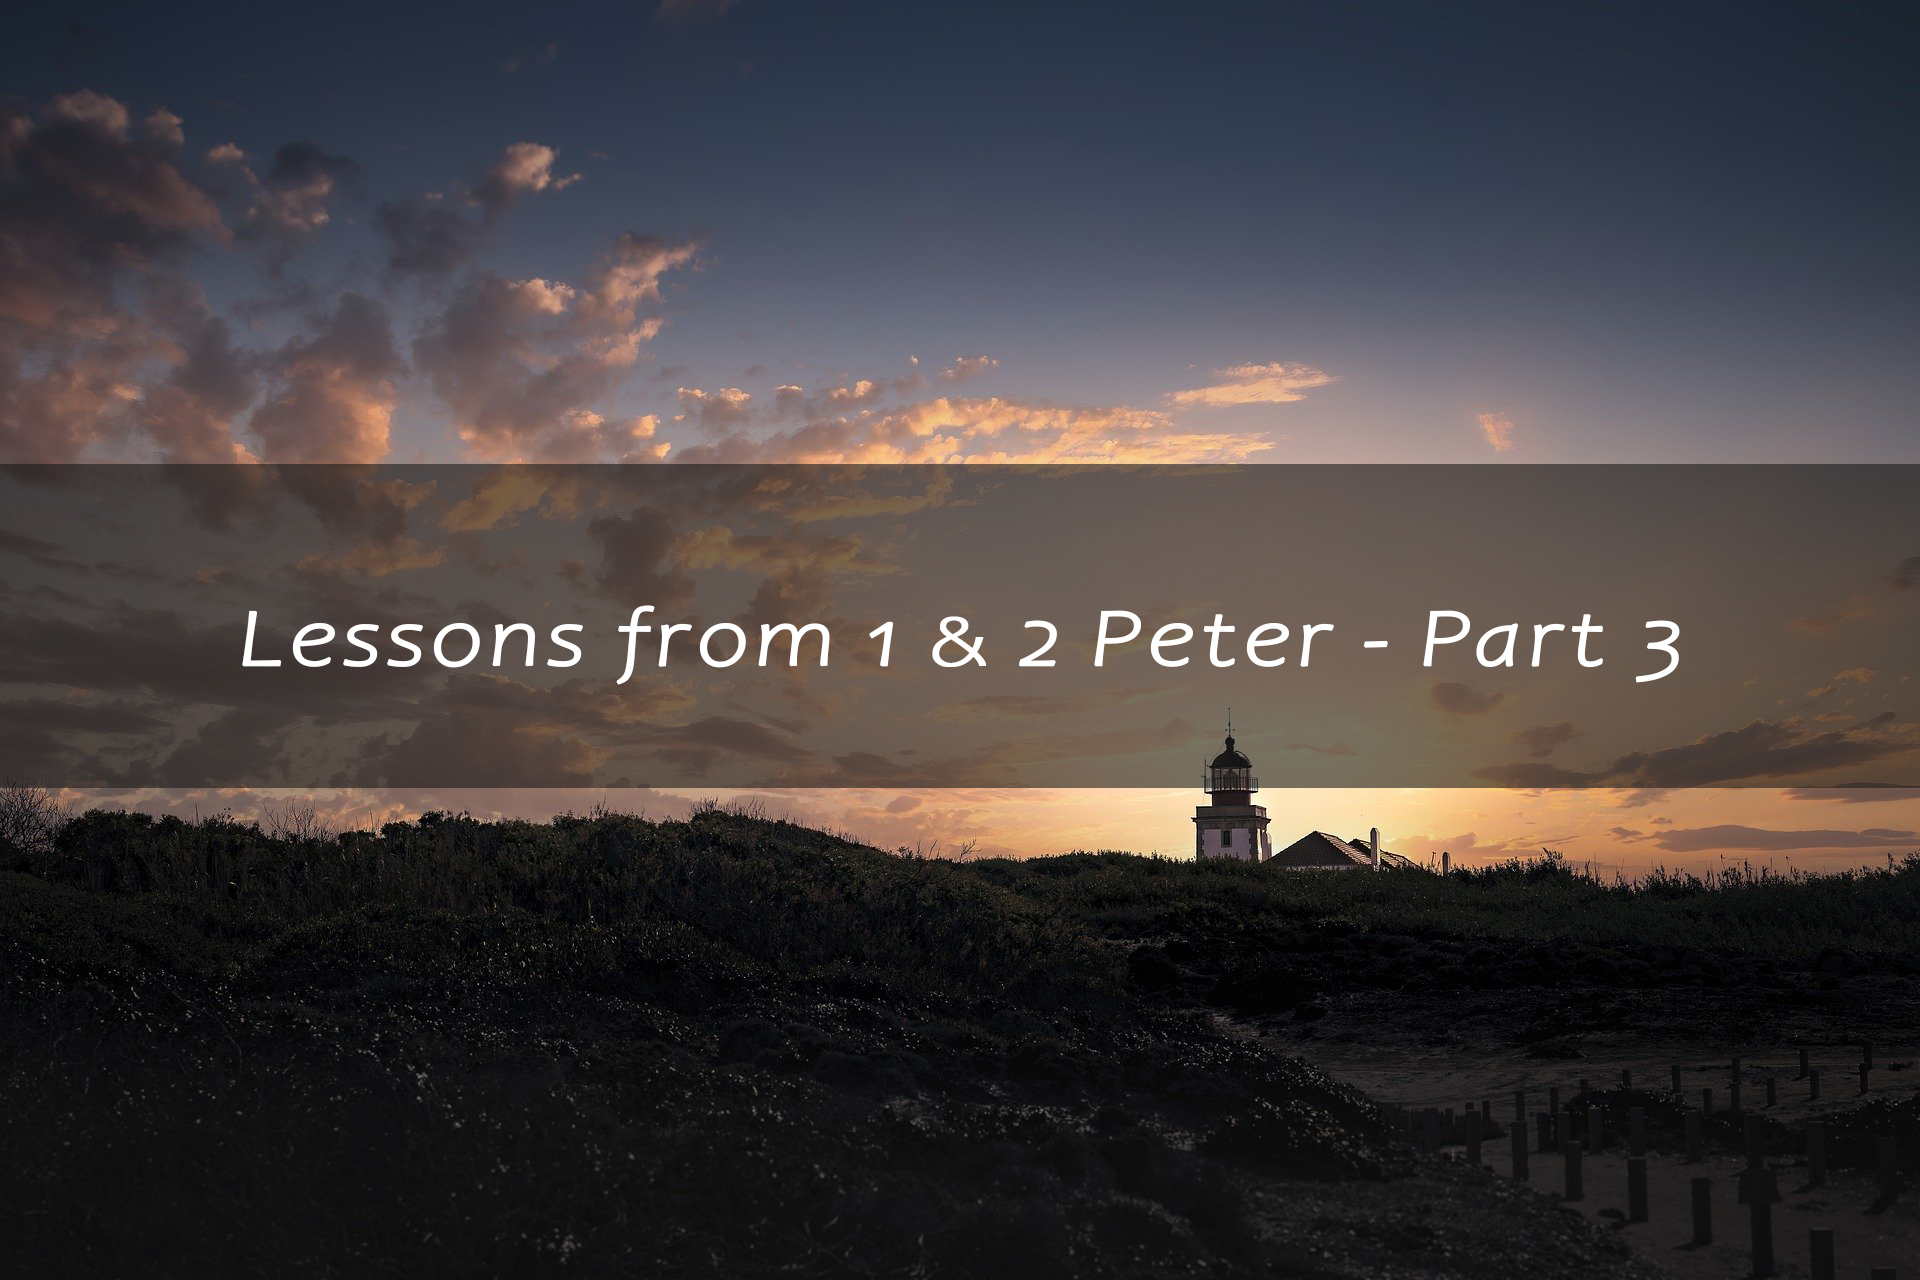 Lessons from 1 & 2 peter part 3 <br/> Jacob K Mathai